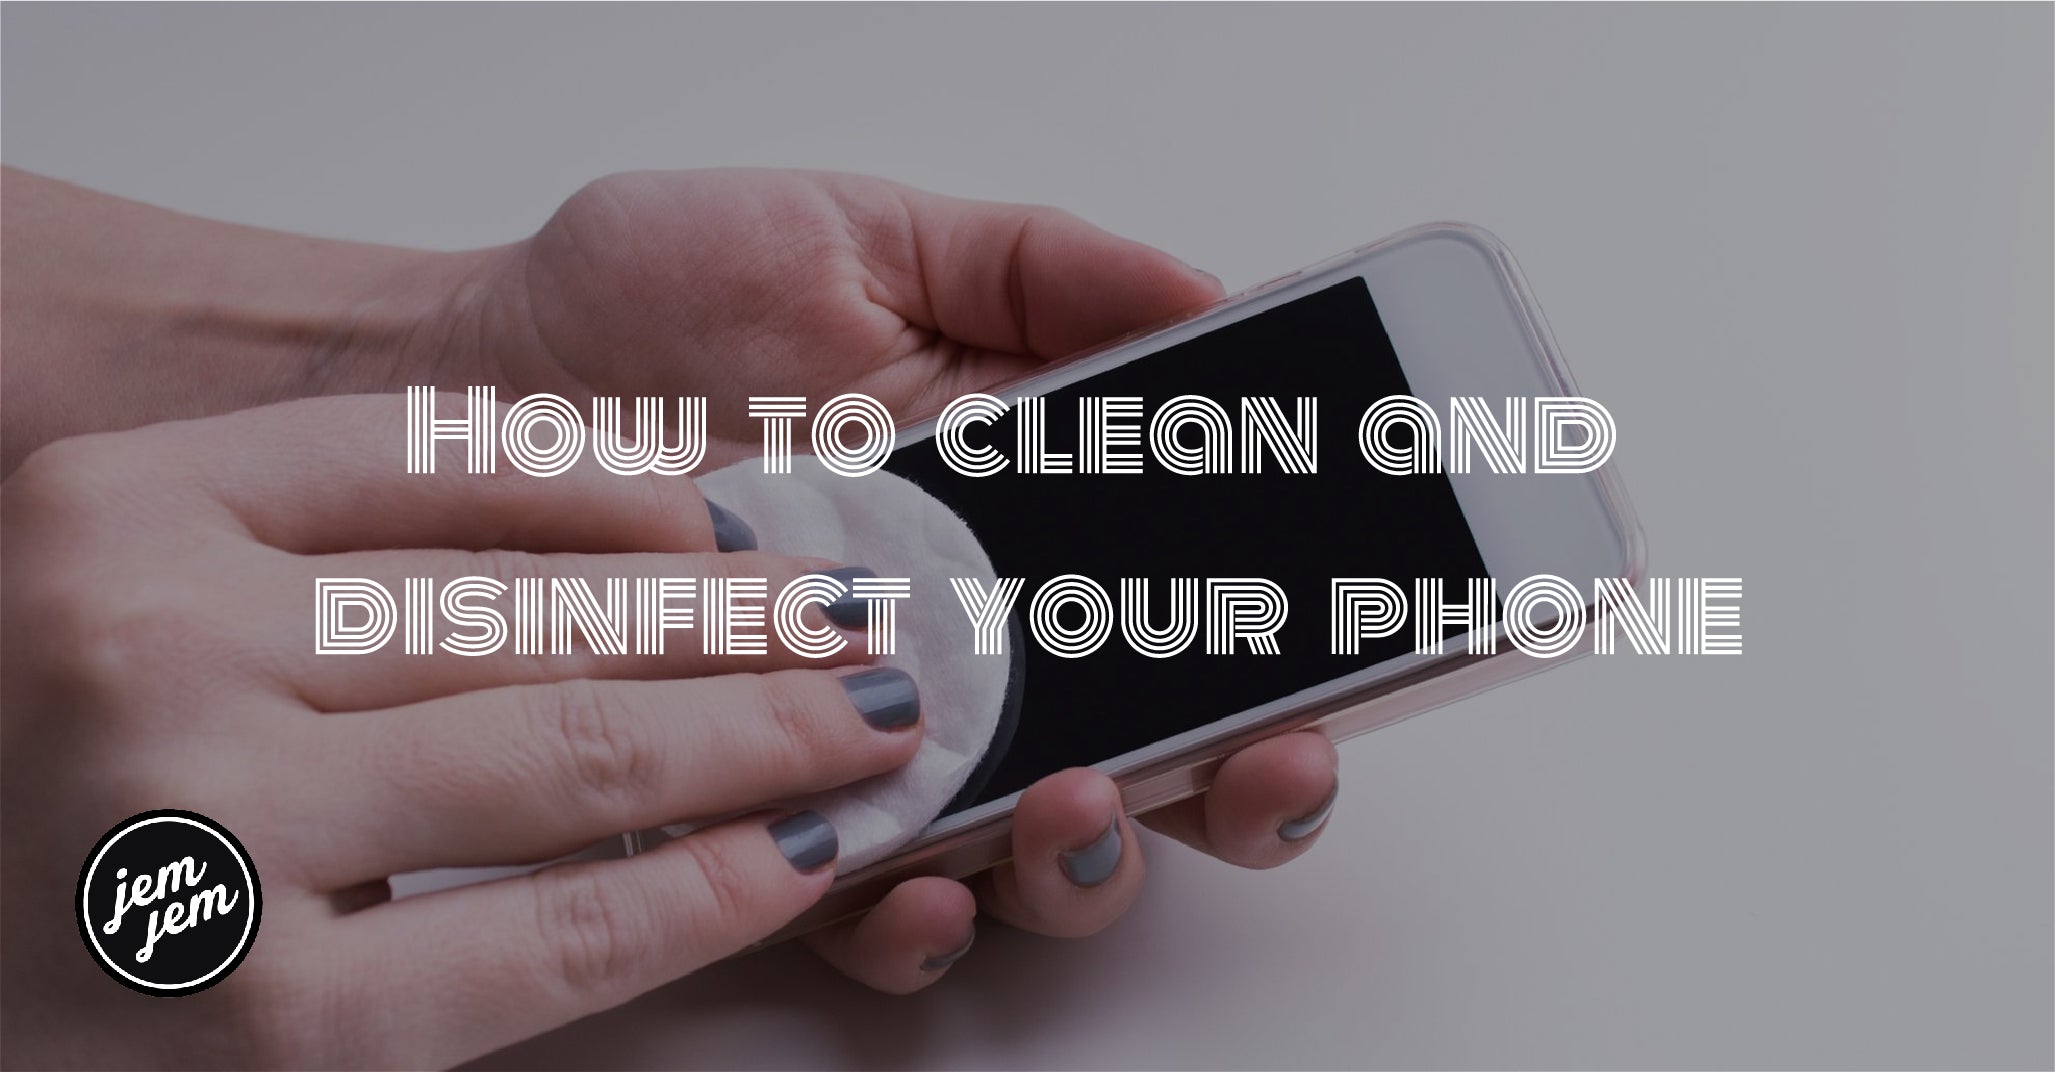 How to clean and disinfect your phone